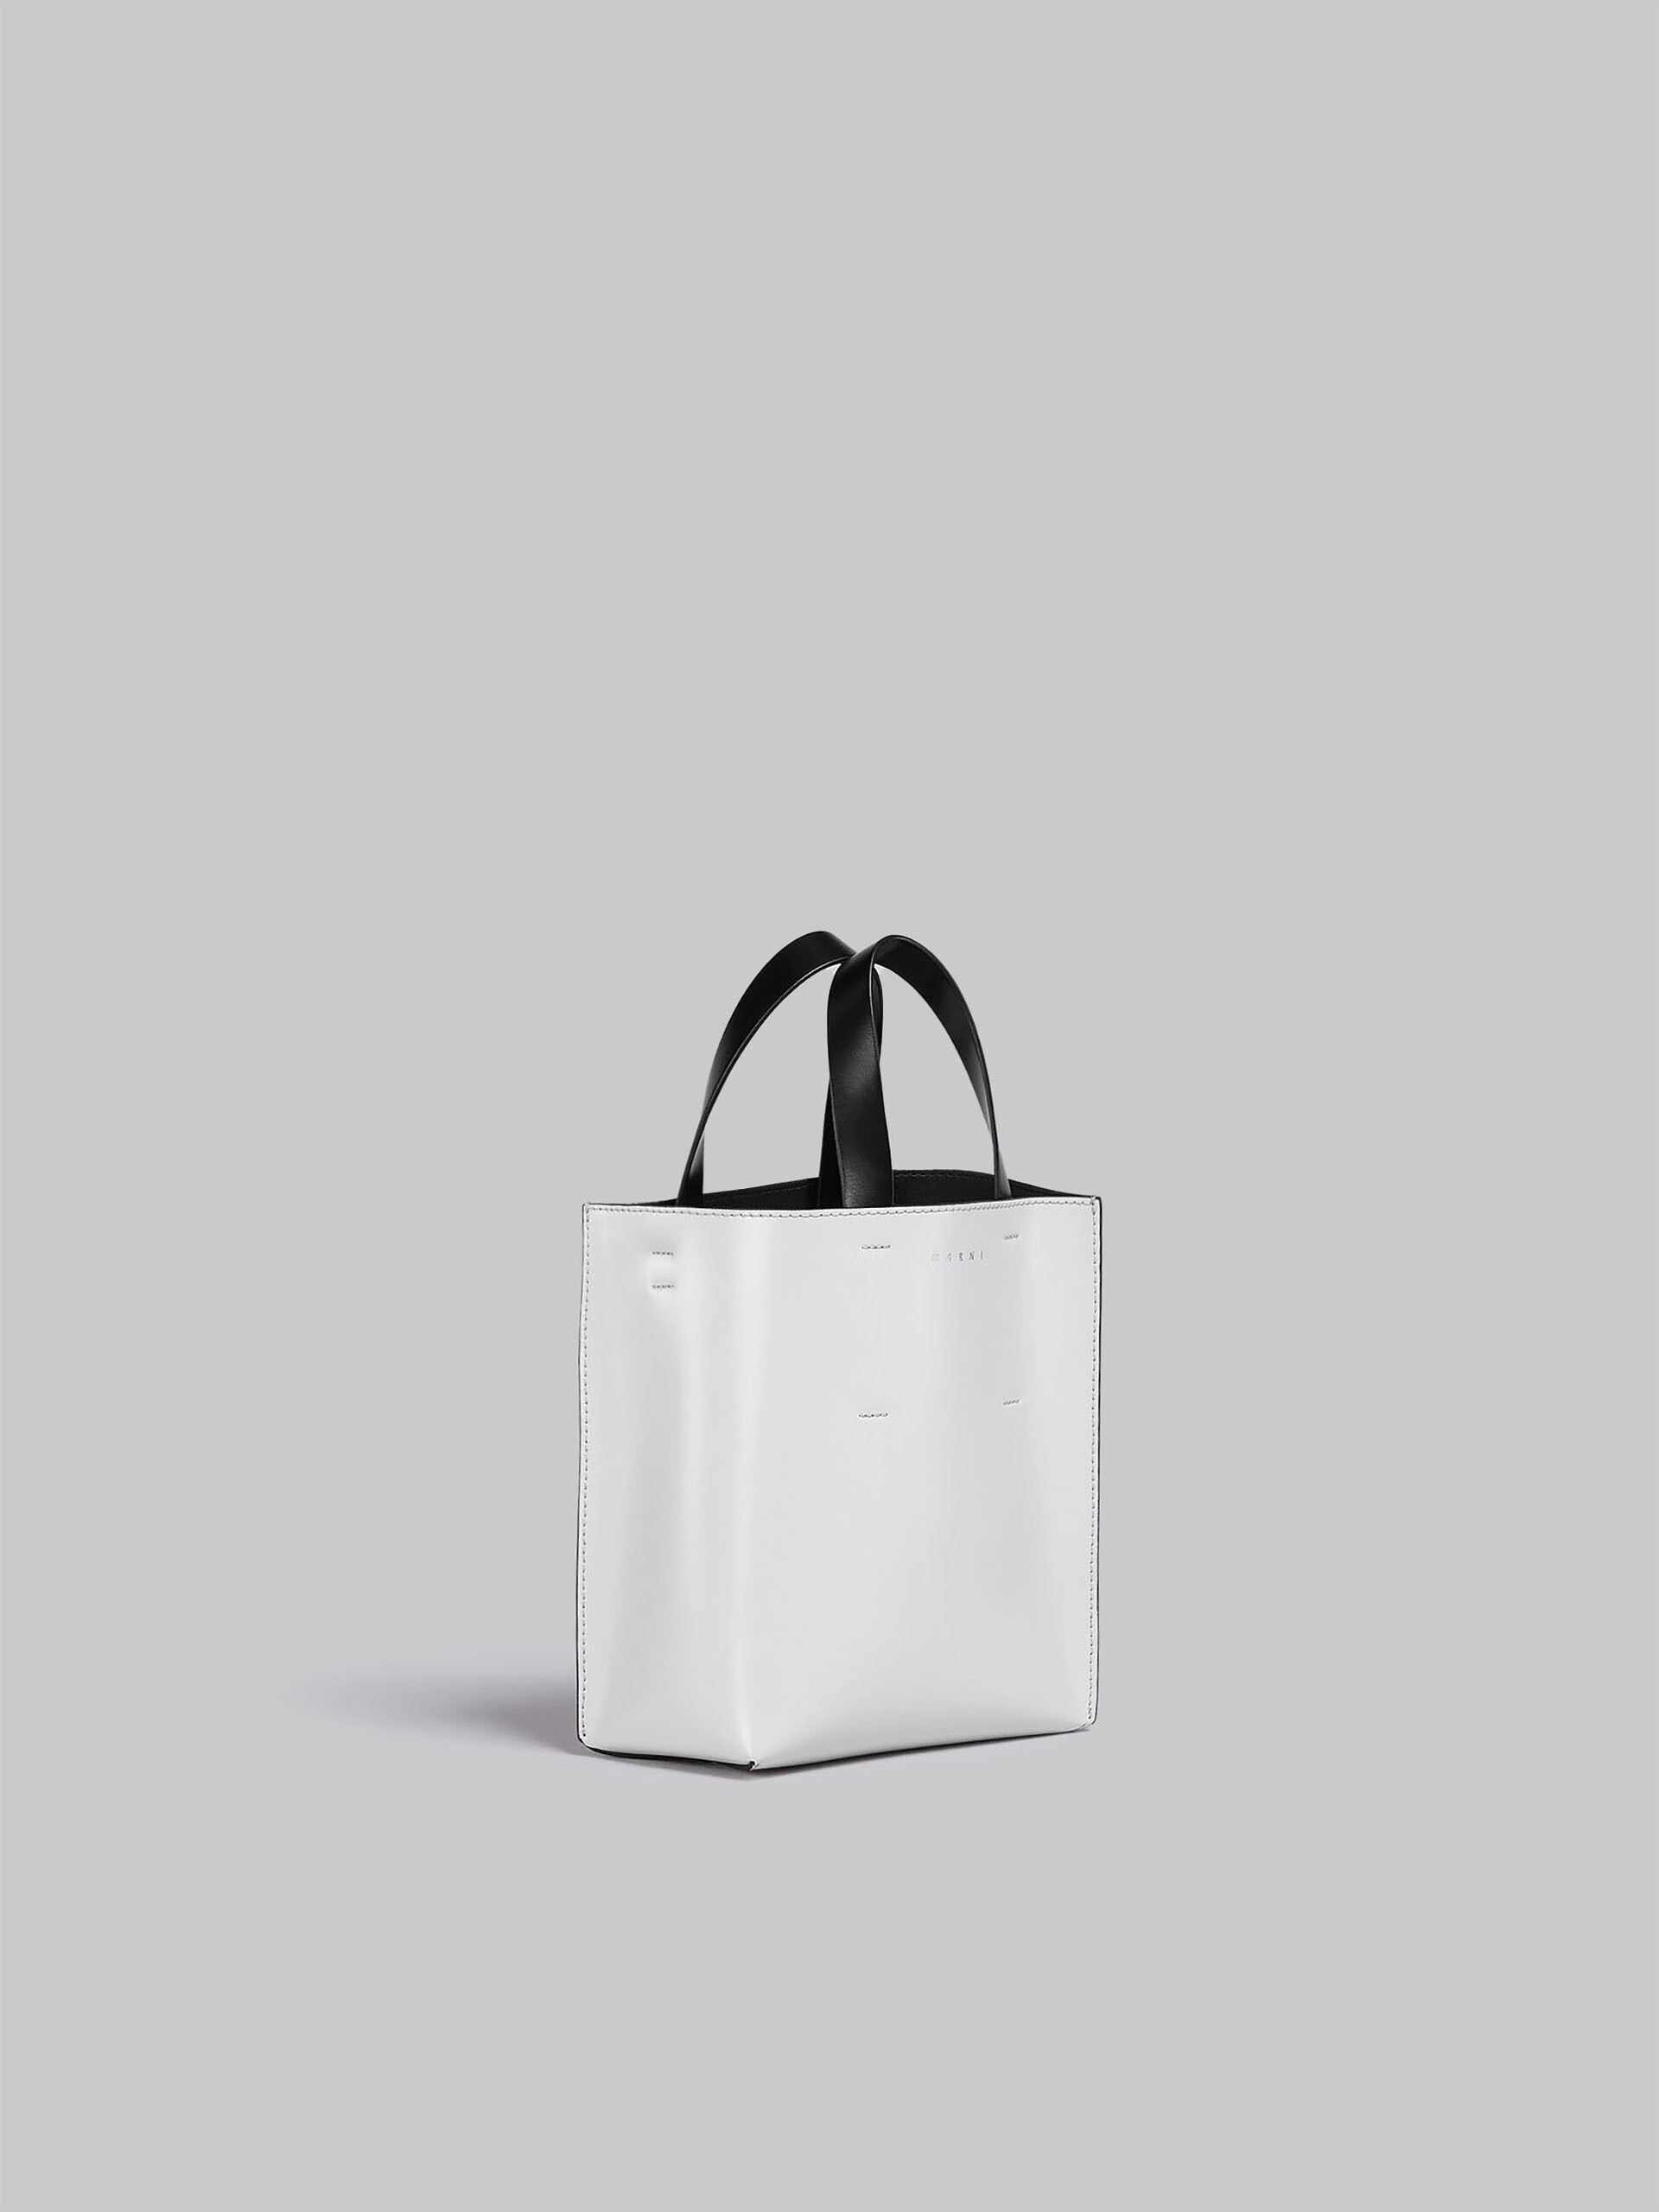 MUSEO mini bag in white and black leather